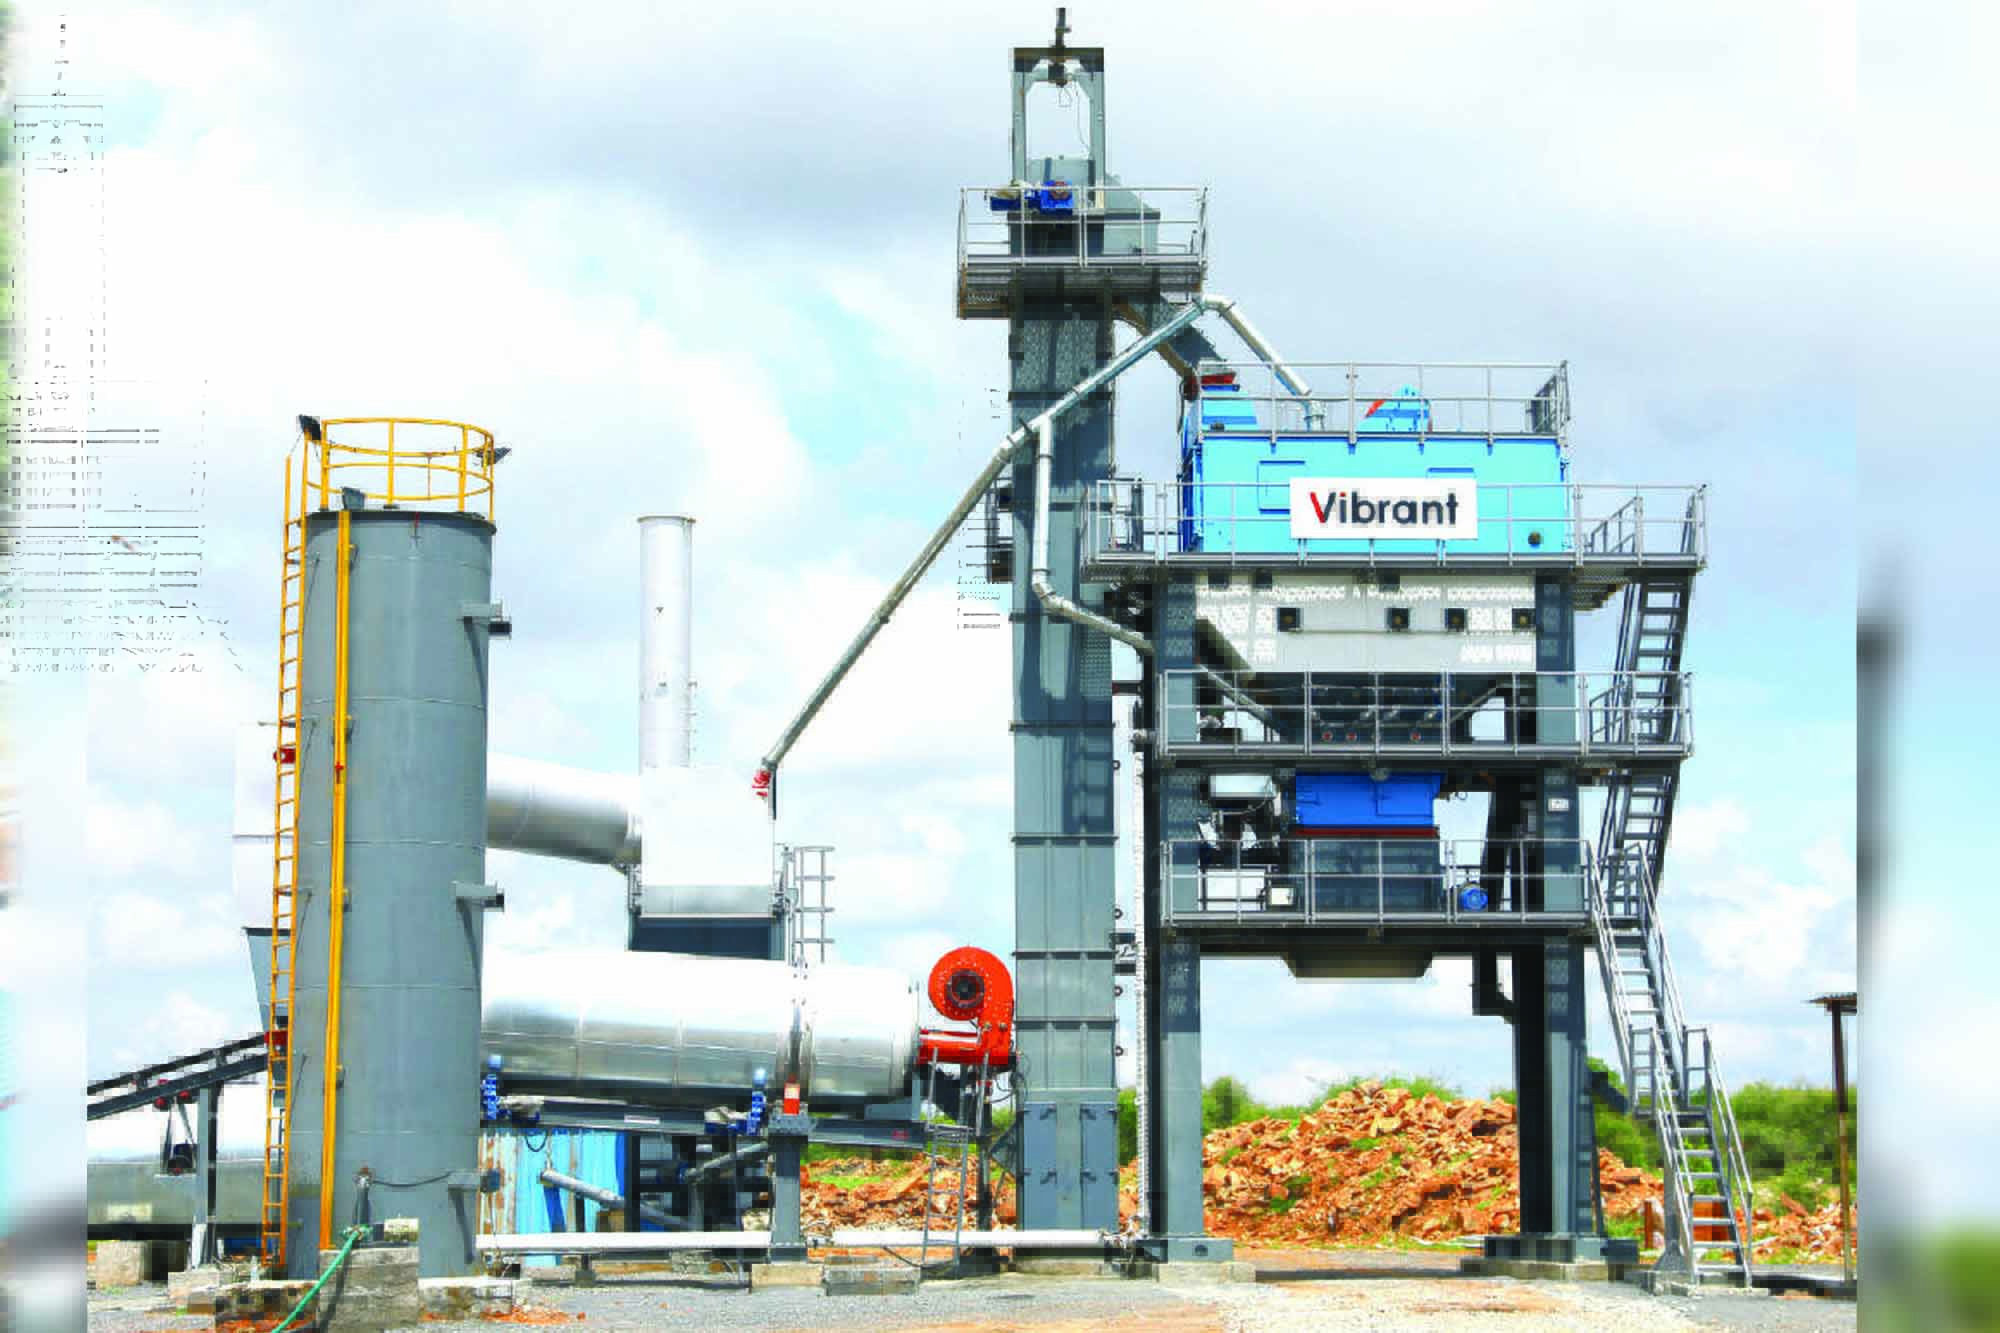 Explore the manufacturing prowess of Vibrant Construction Equipment, an industry leader located near Hyderabad. With an ISO 9001-2015 certification as its guiding beacon, Vibrant excels in producing Asphalt Batch Mix and Drum Mix plants, showcasing a versatile range tailored to meet customer specifications. Learn how Vibrant's commitment to quality assurance, including meticulous inspections and internal audits, ensures the delivery of top-notch equipment to its esteemed clientele.